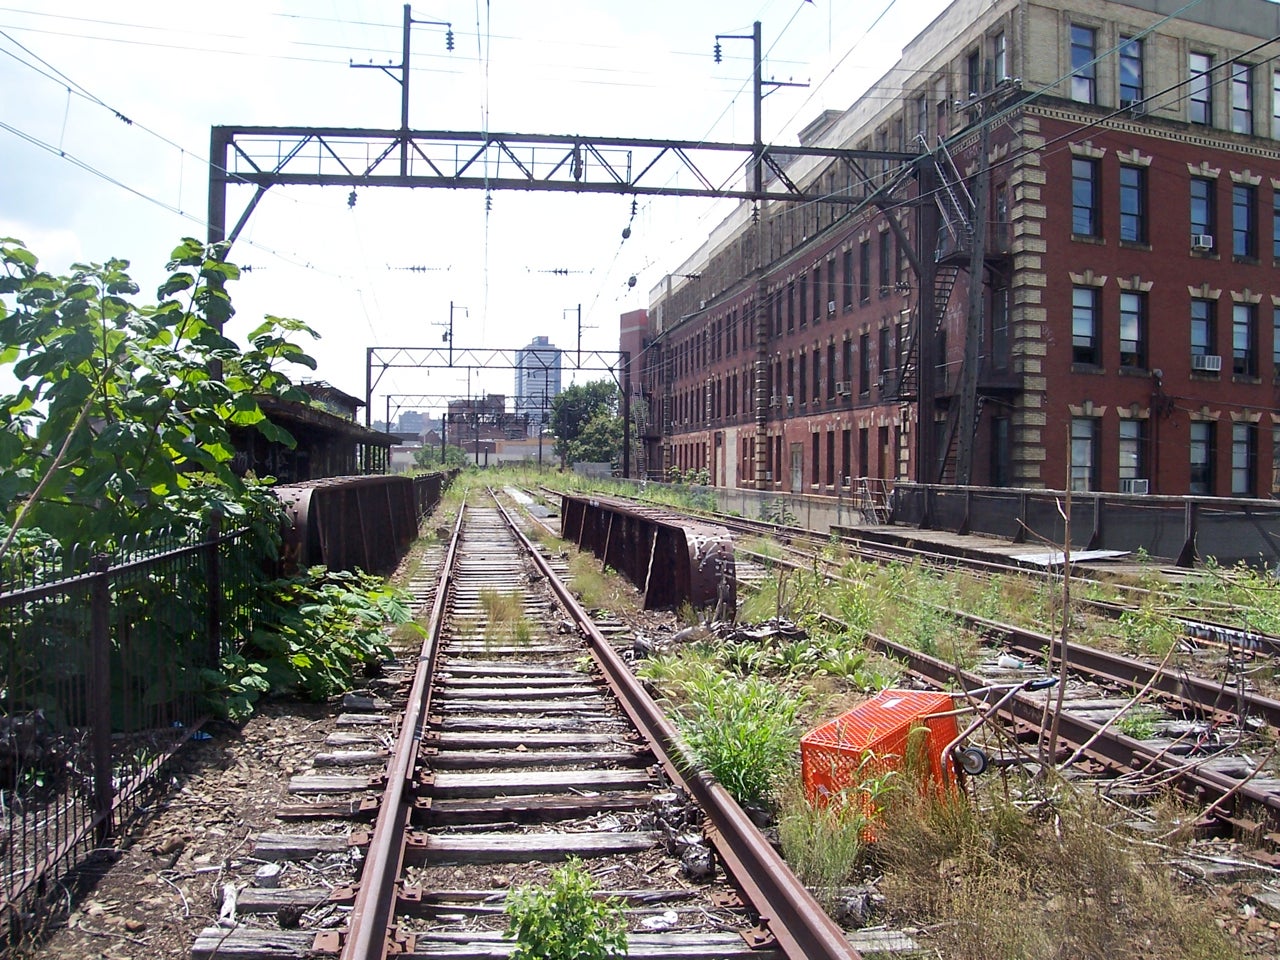 View from atop the vacant Reading Viaduct at around 10th and Spring Garden Streets